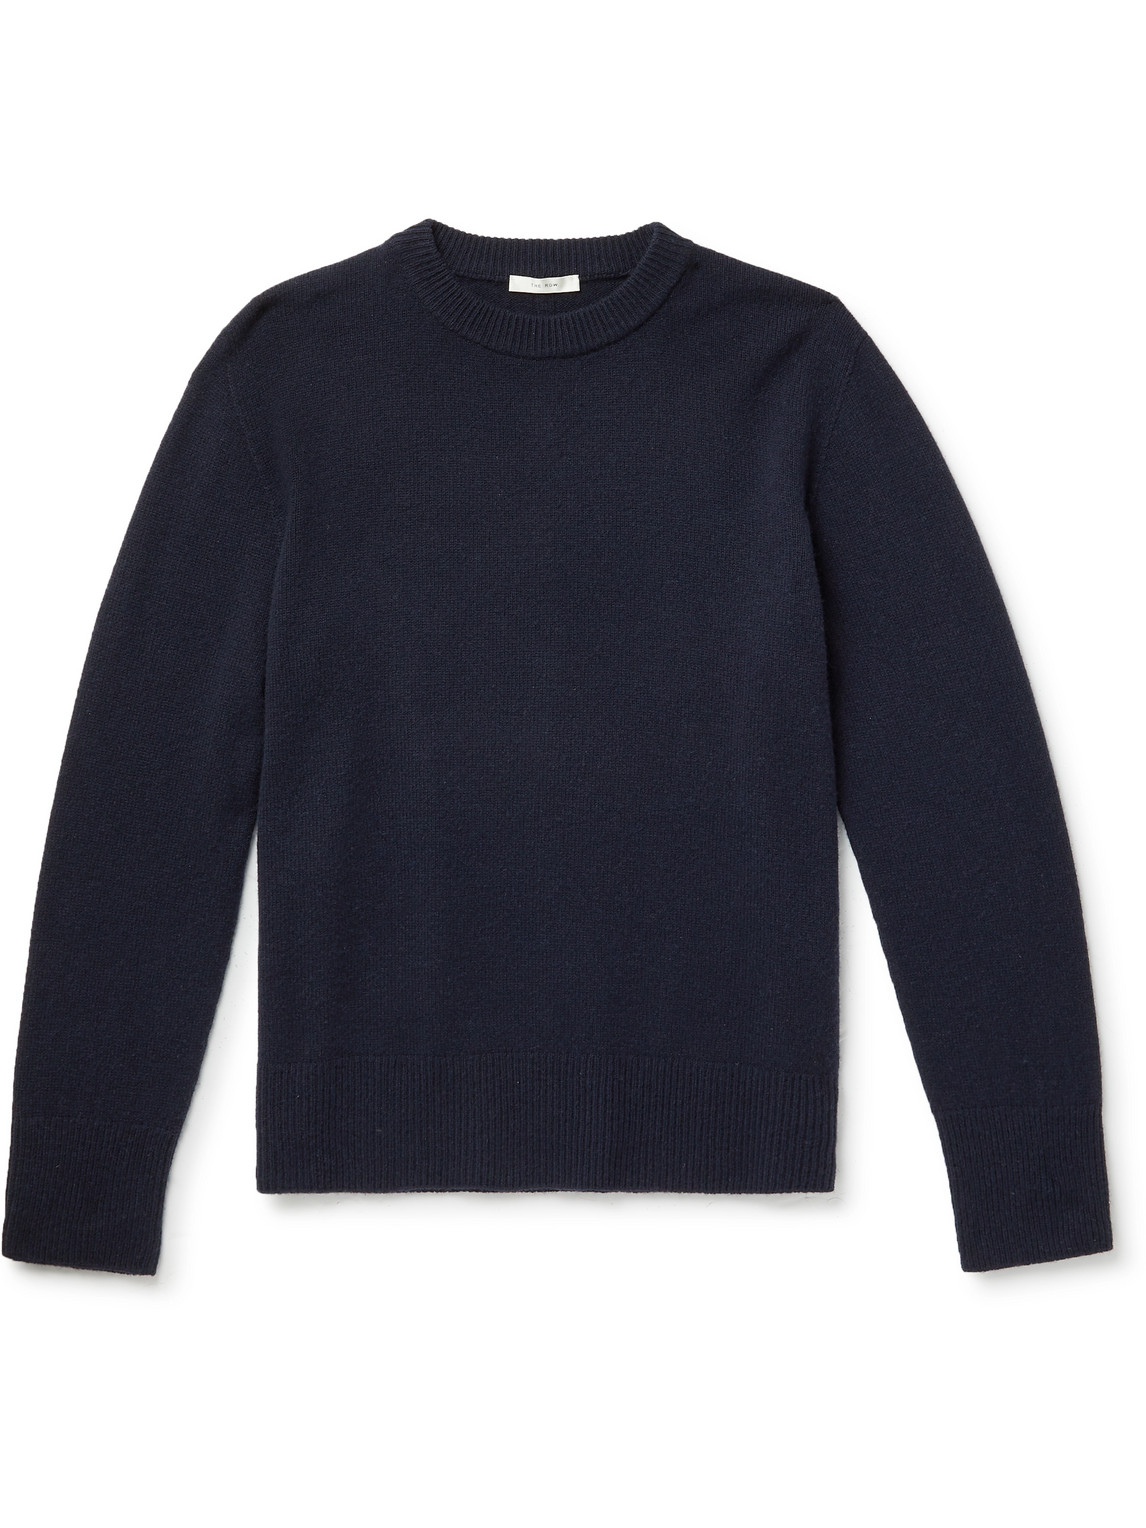 Sibem Wool and Cashmere-Blend Sweater